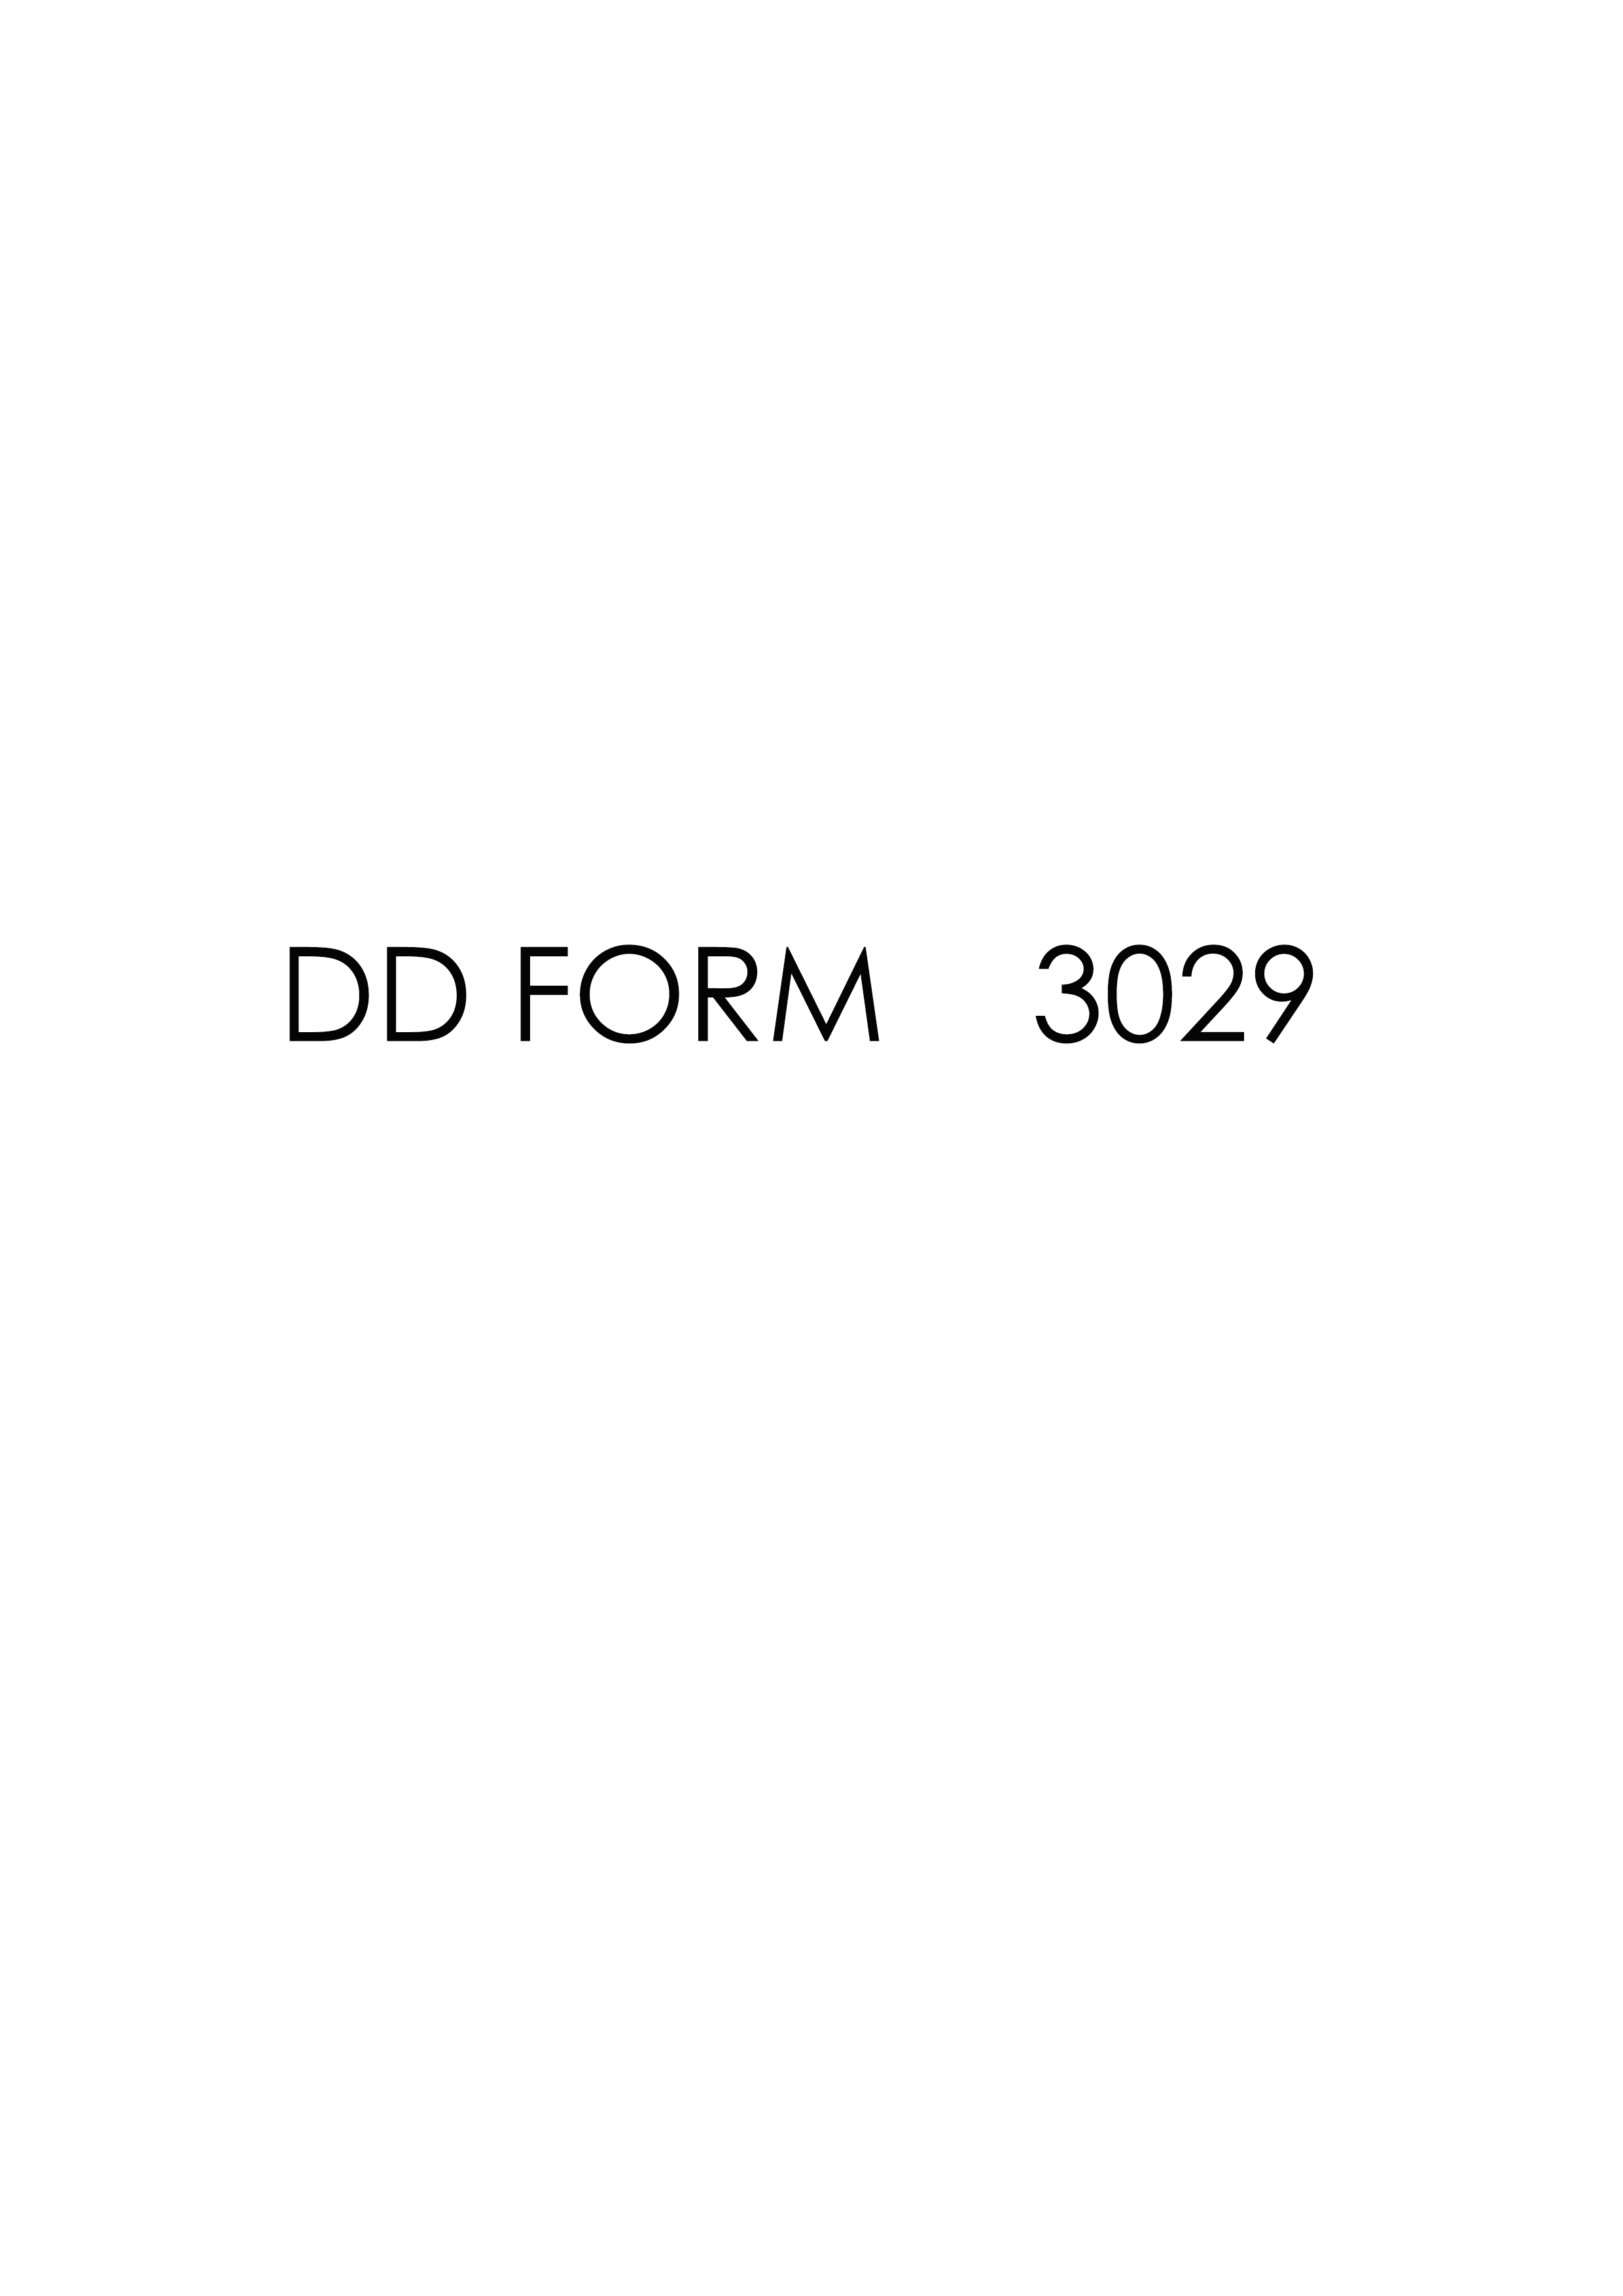 Download Fillable dd Form 3029